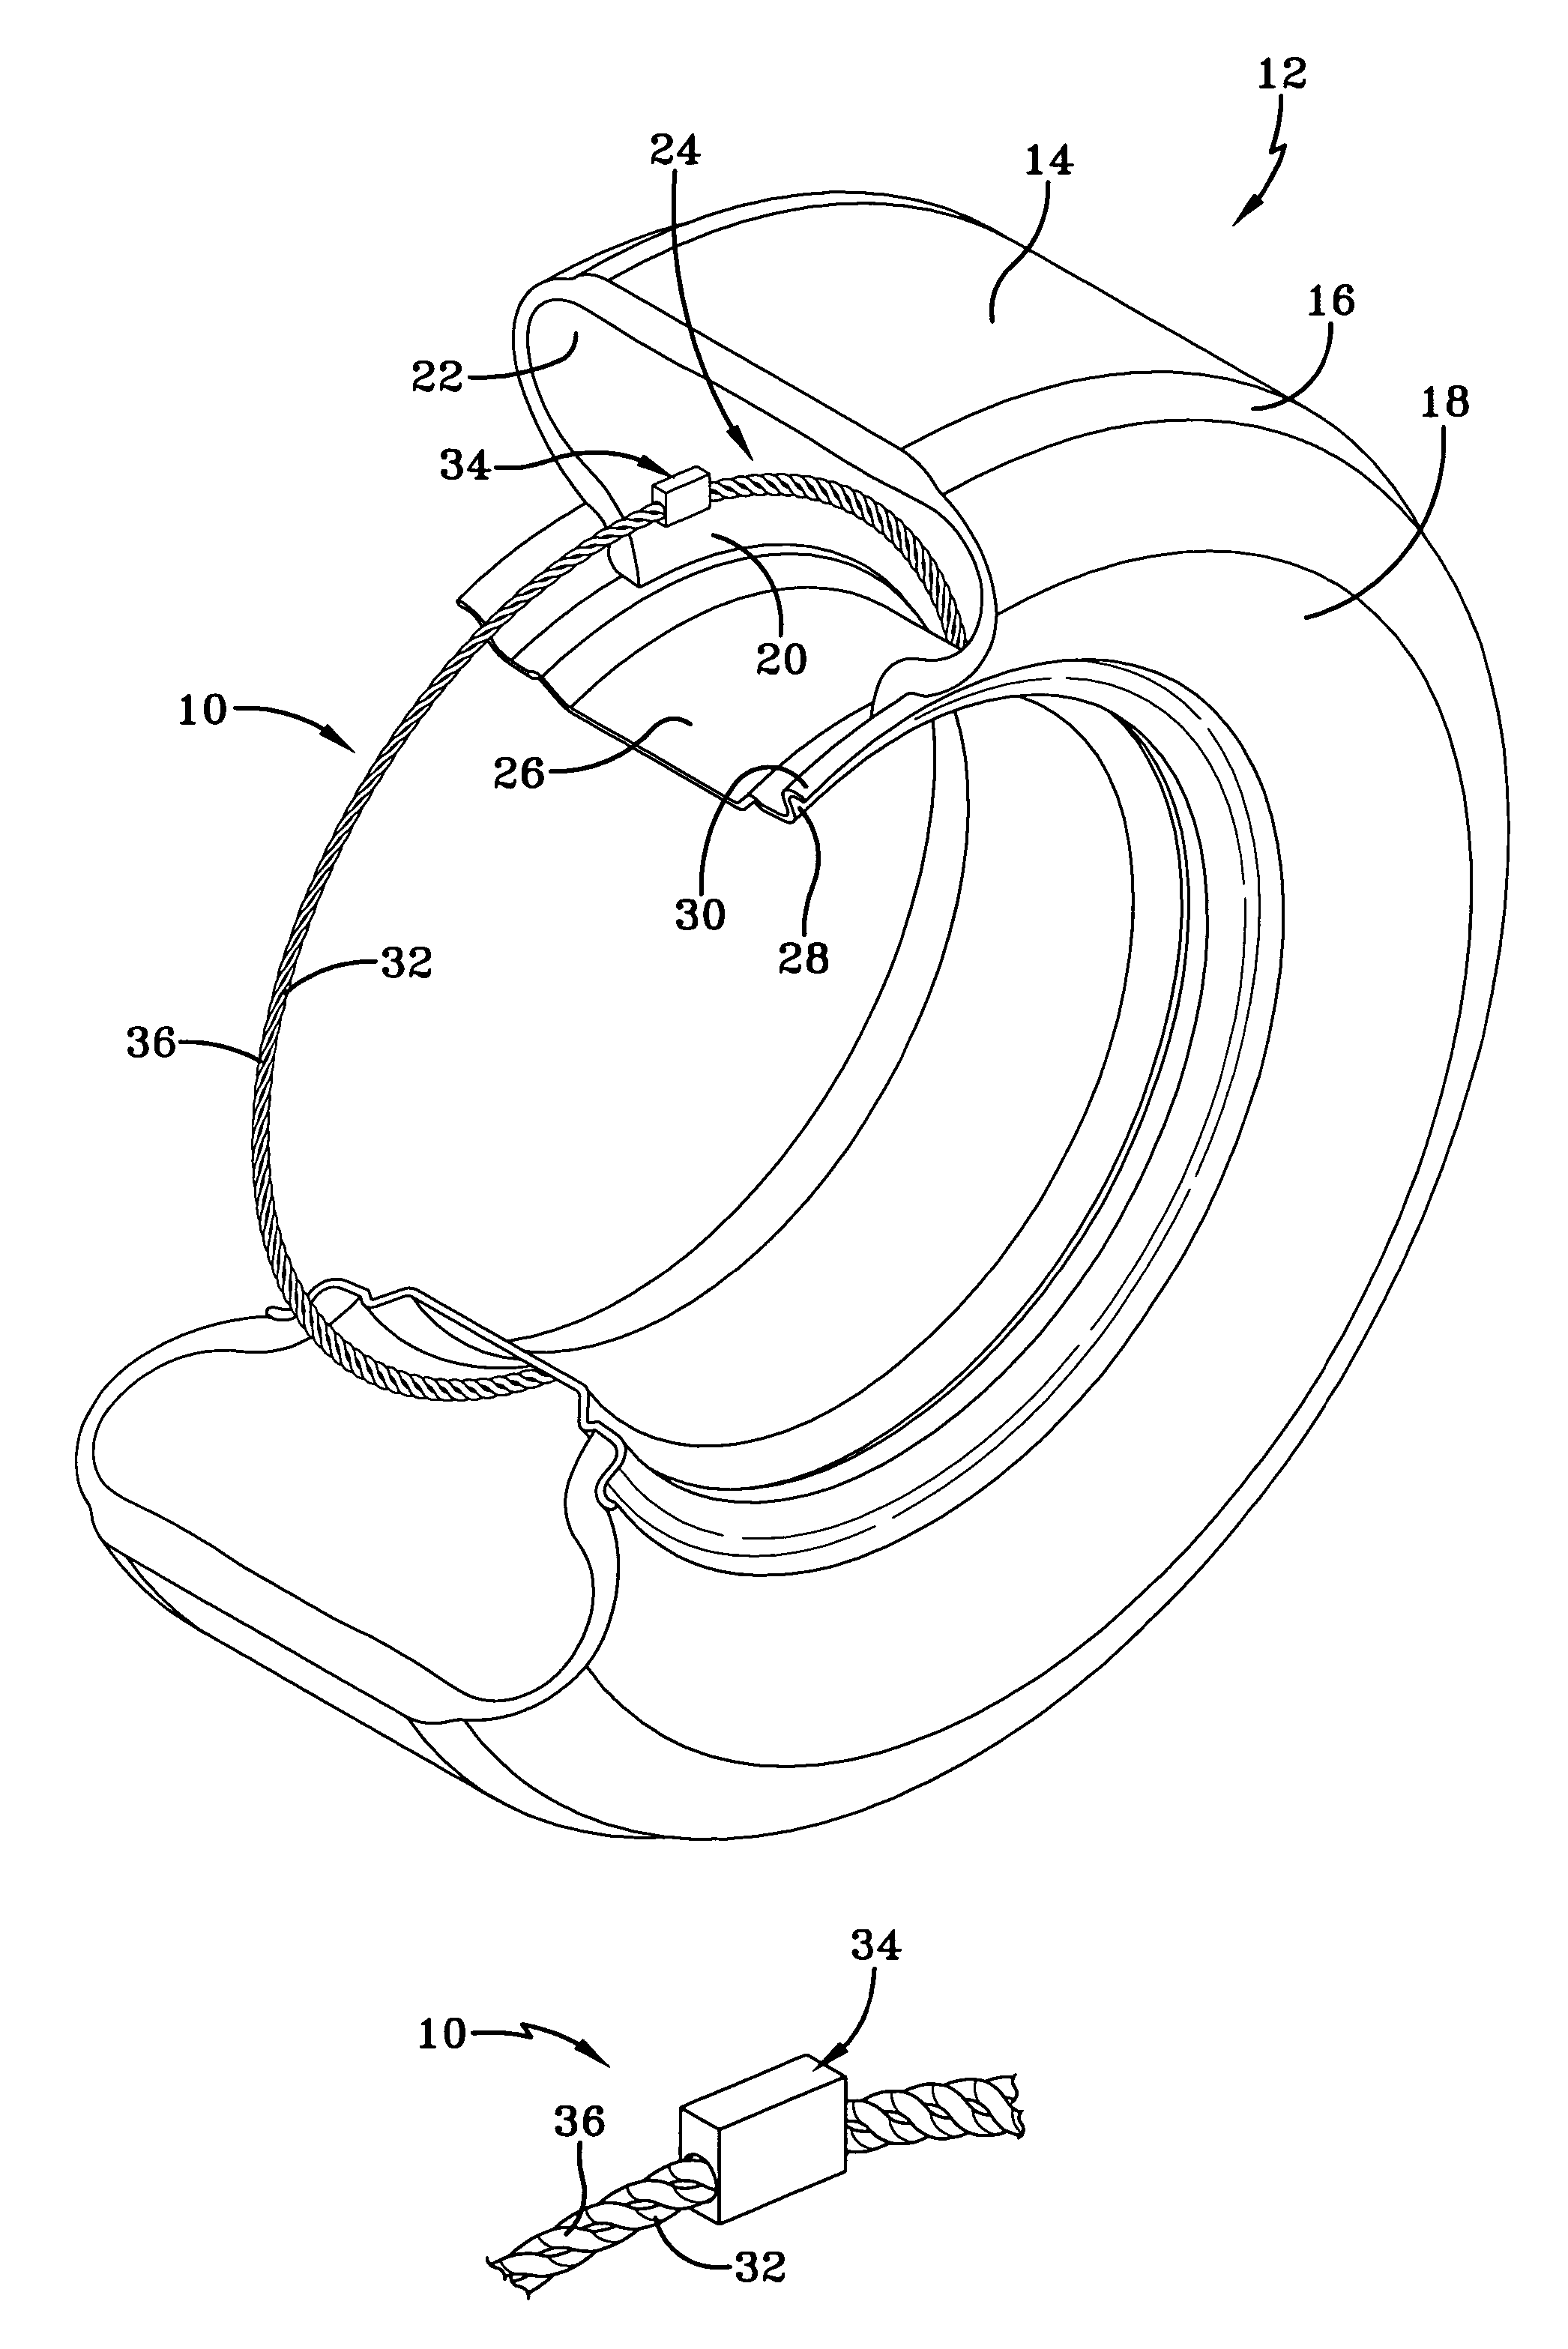 Flexible tinsel ribbon antenna and assembly method for a tire